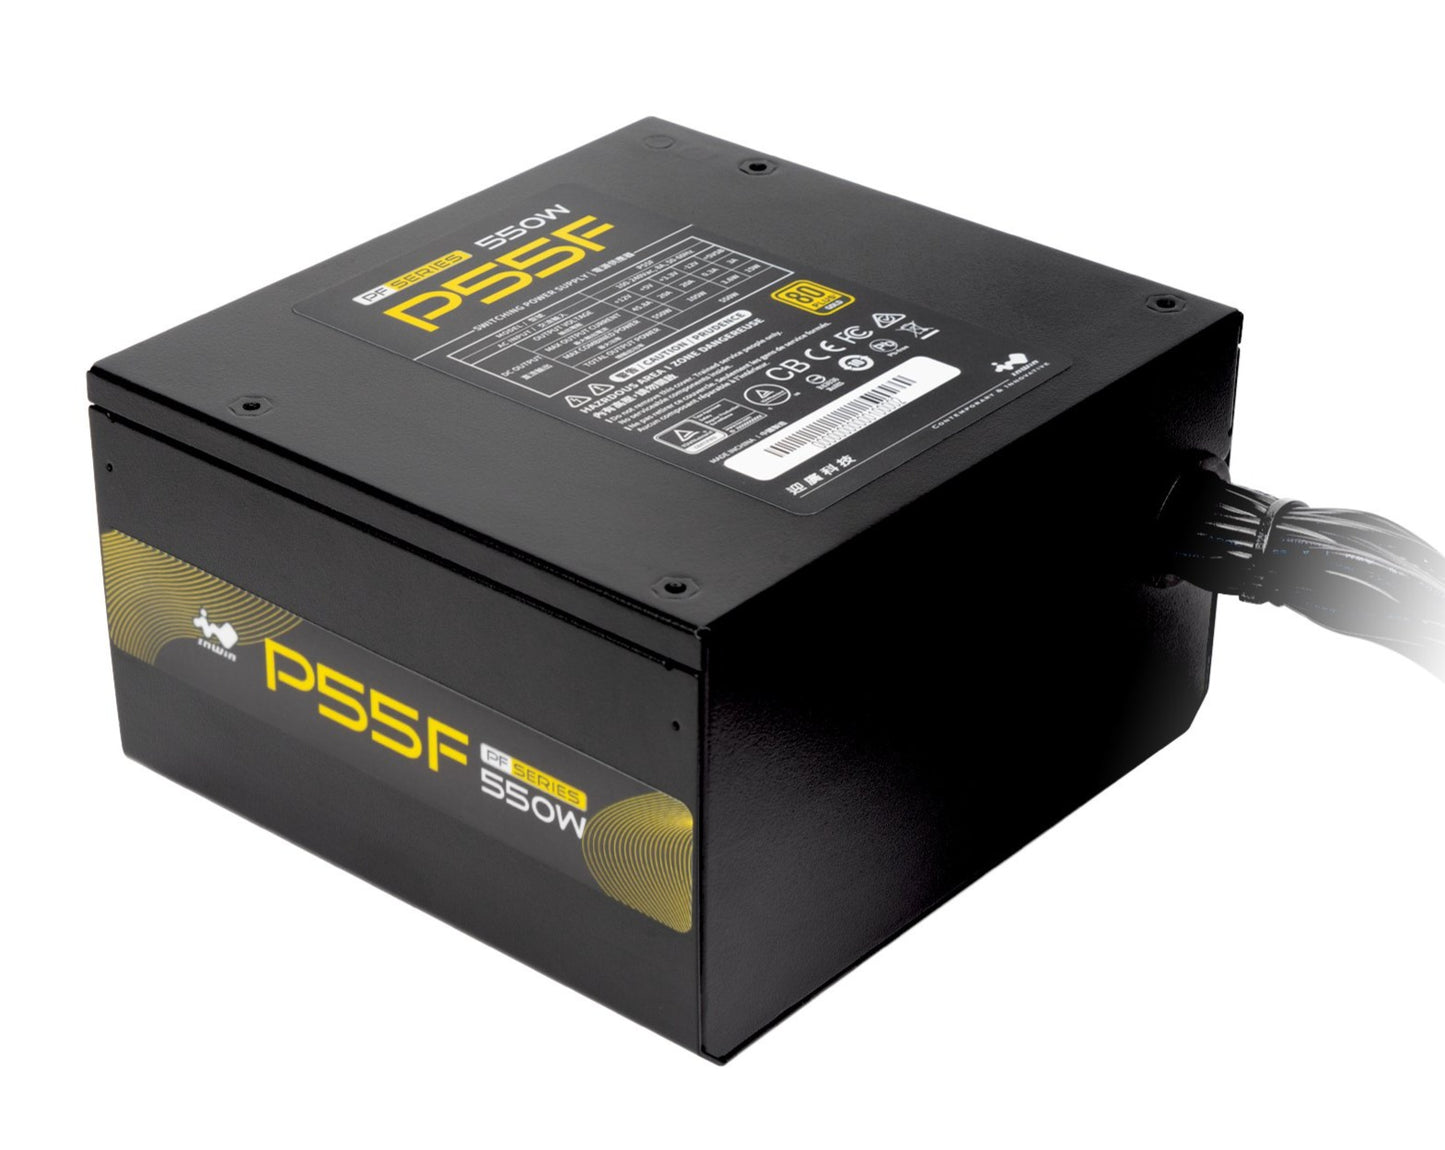 2022 Back To School 904 Plus with P55F PSU